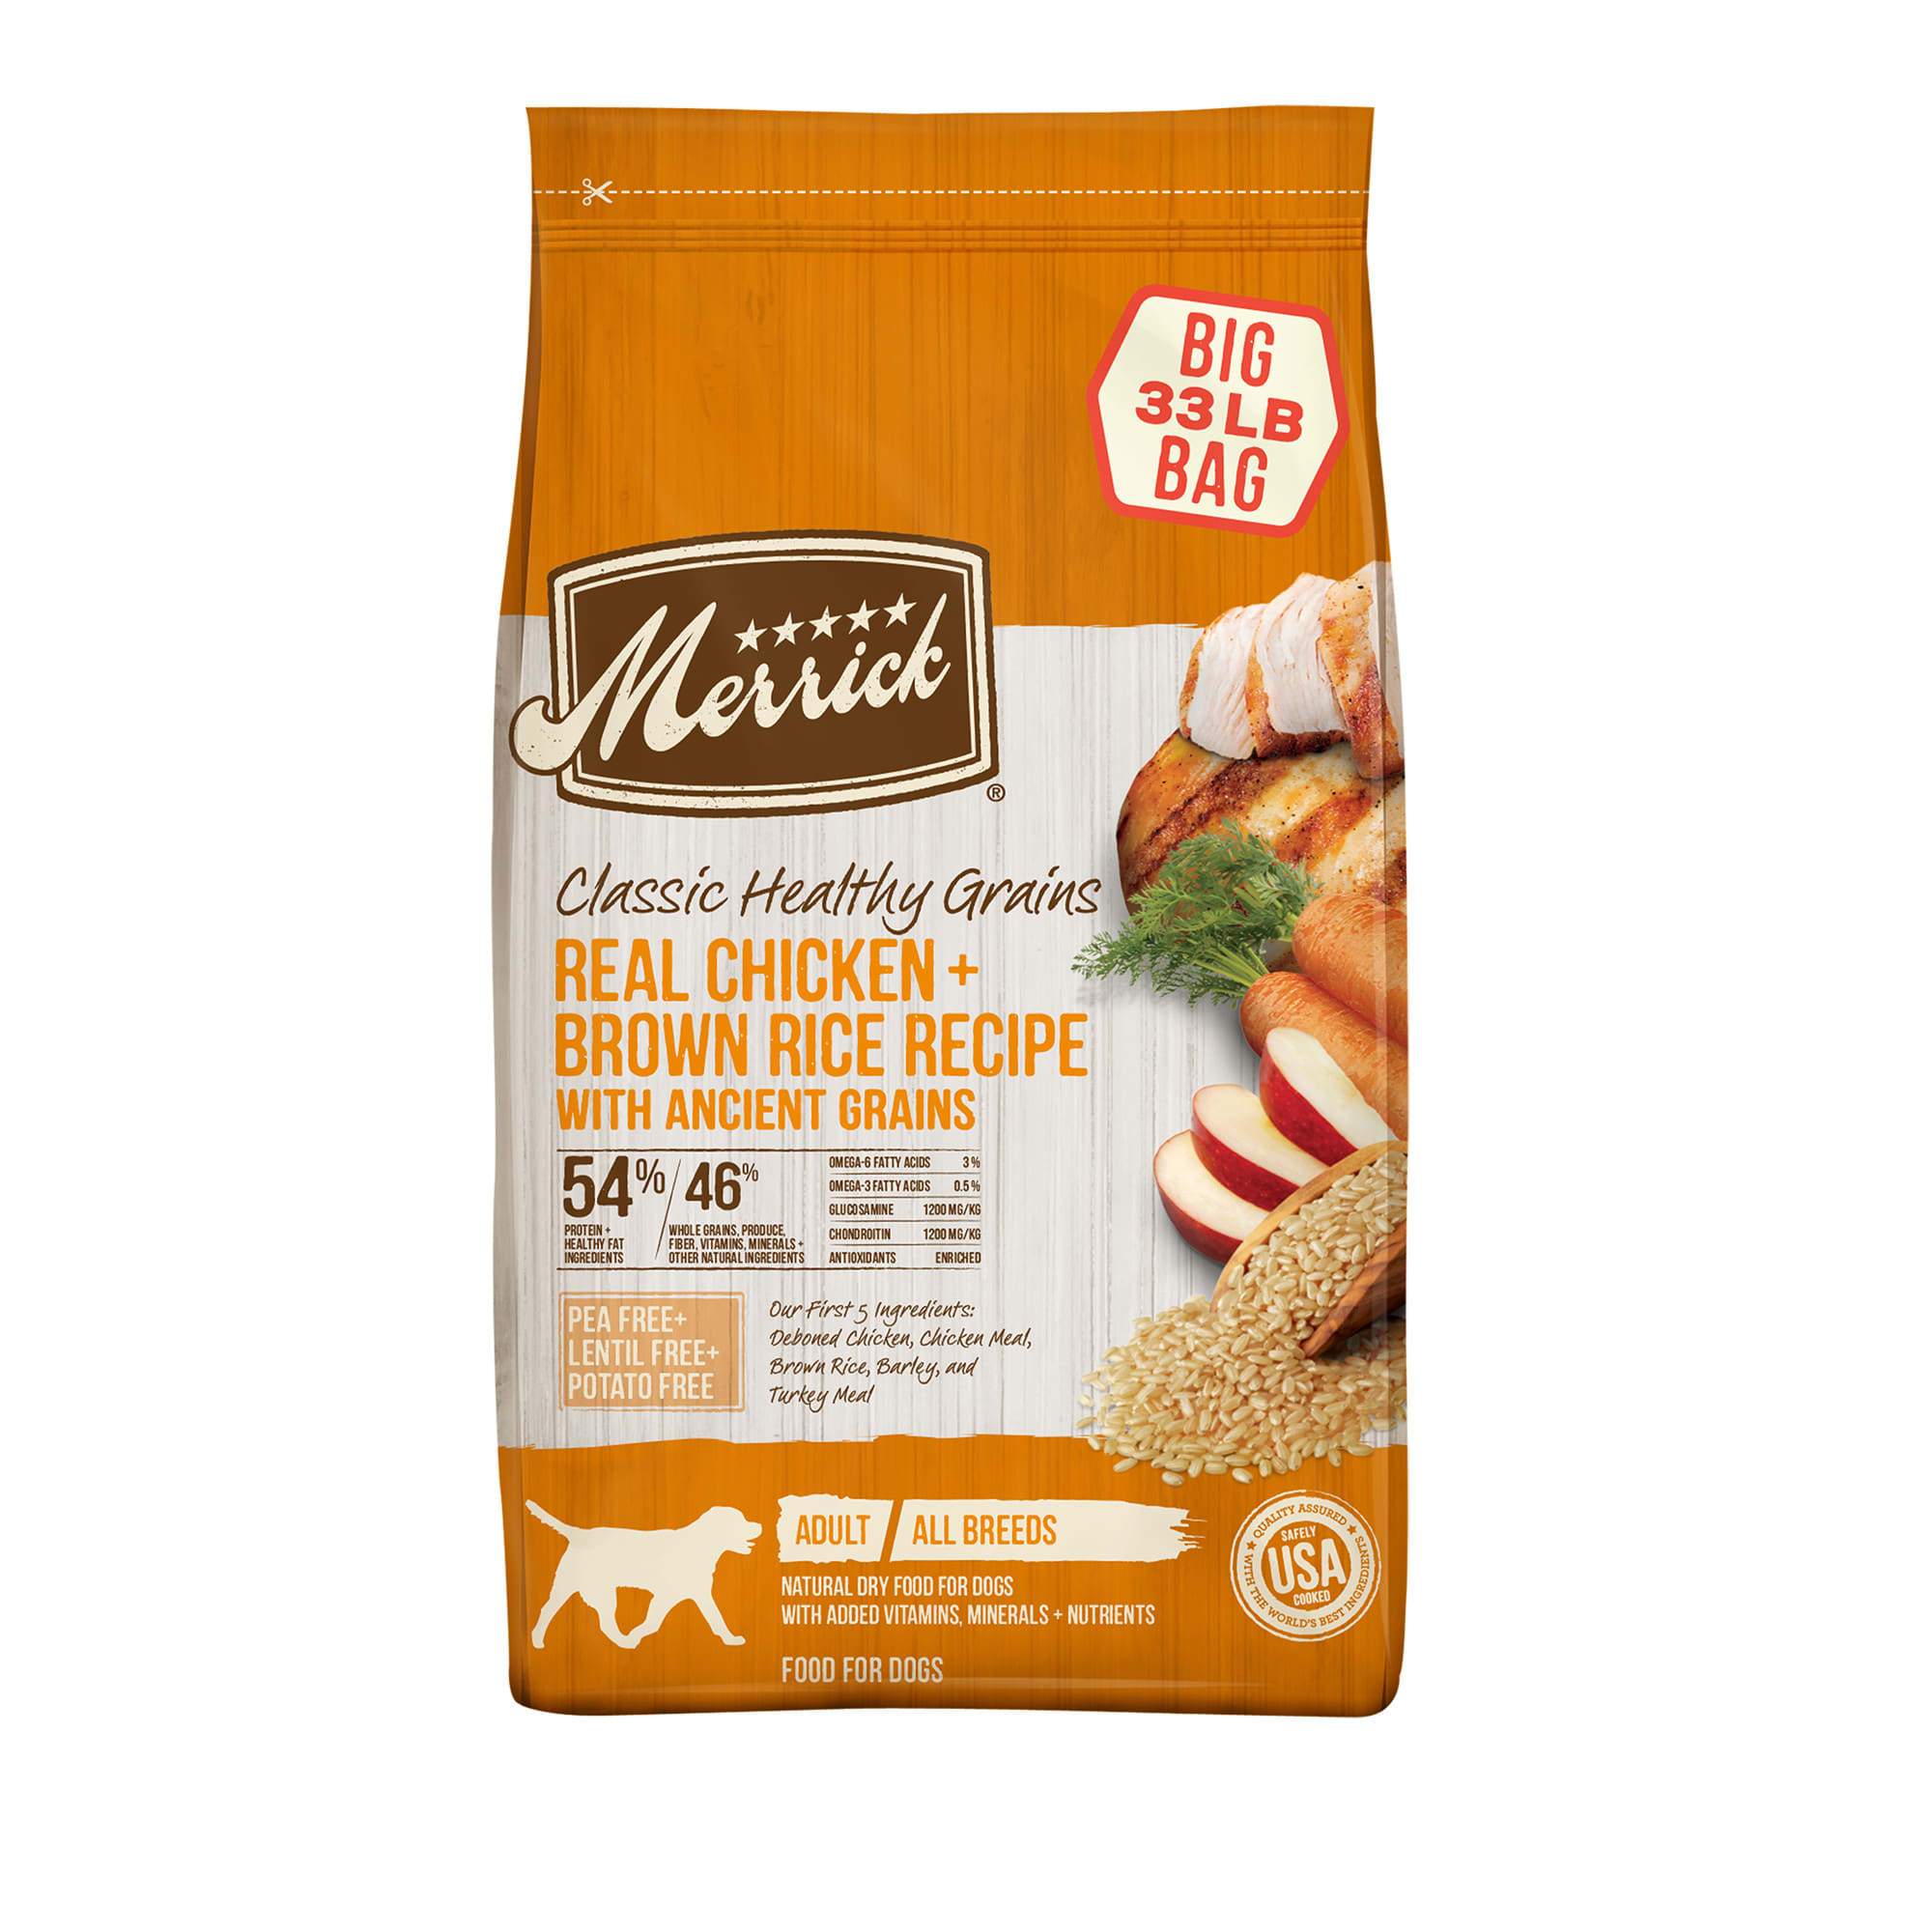 Merrick Classic Canine Chicken + Brown Rice with Healthy Ancient Grains Dry Dog Food - 33 lb Bag  